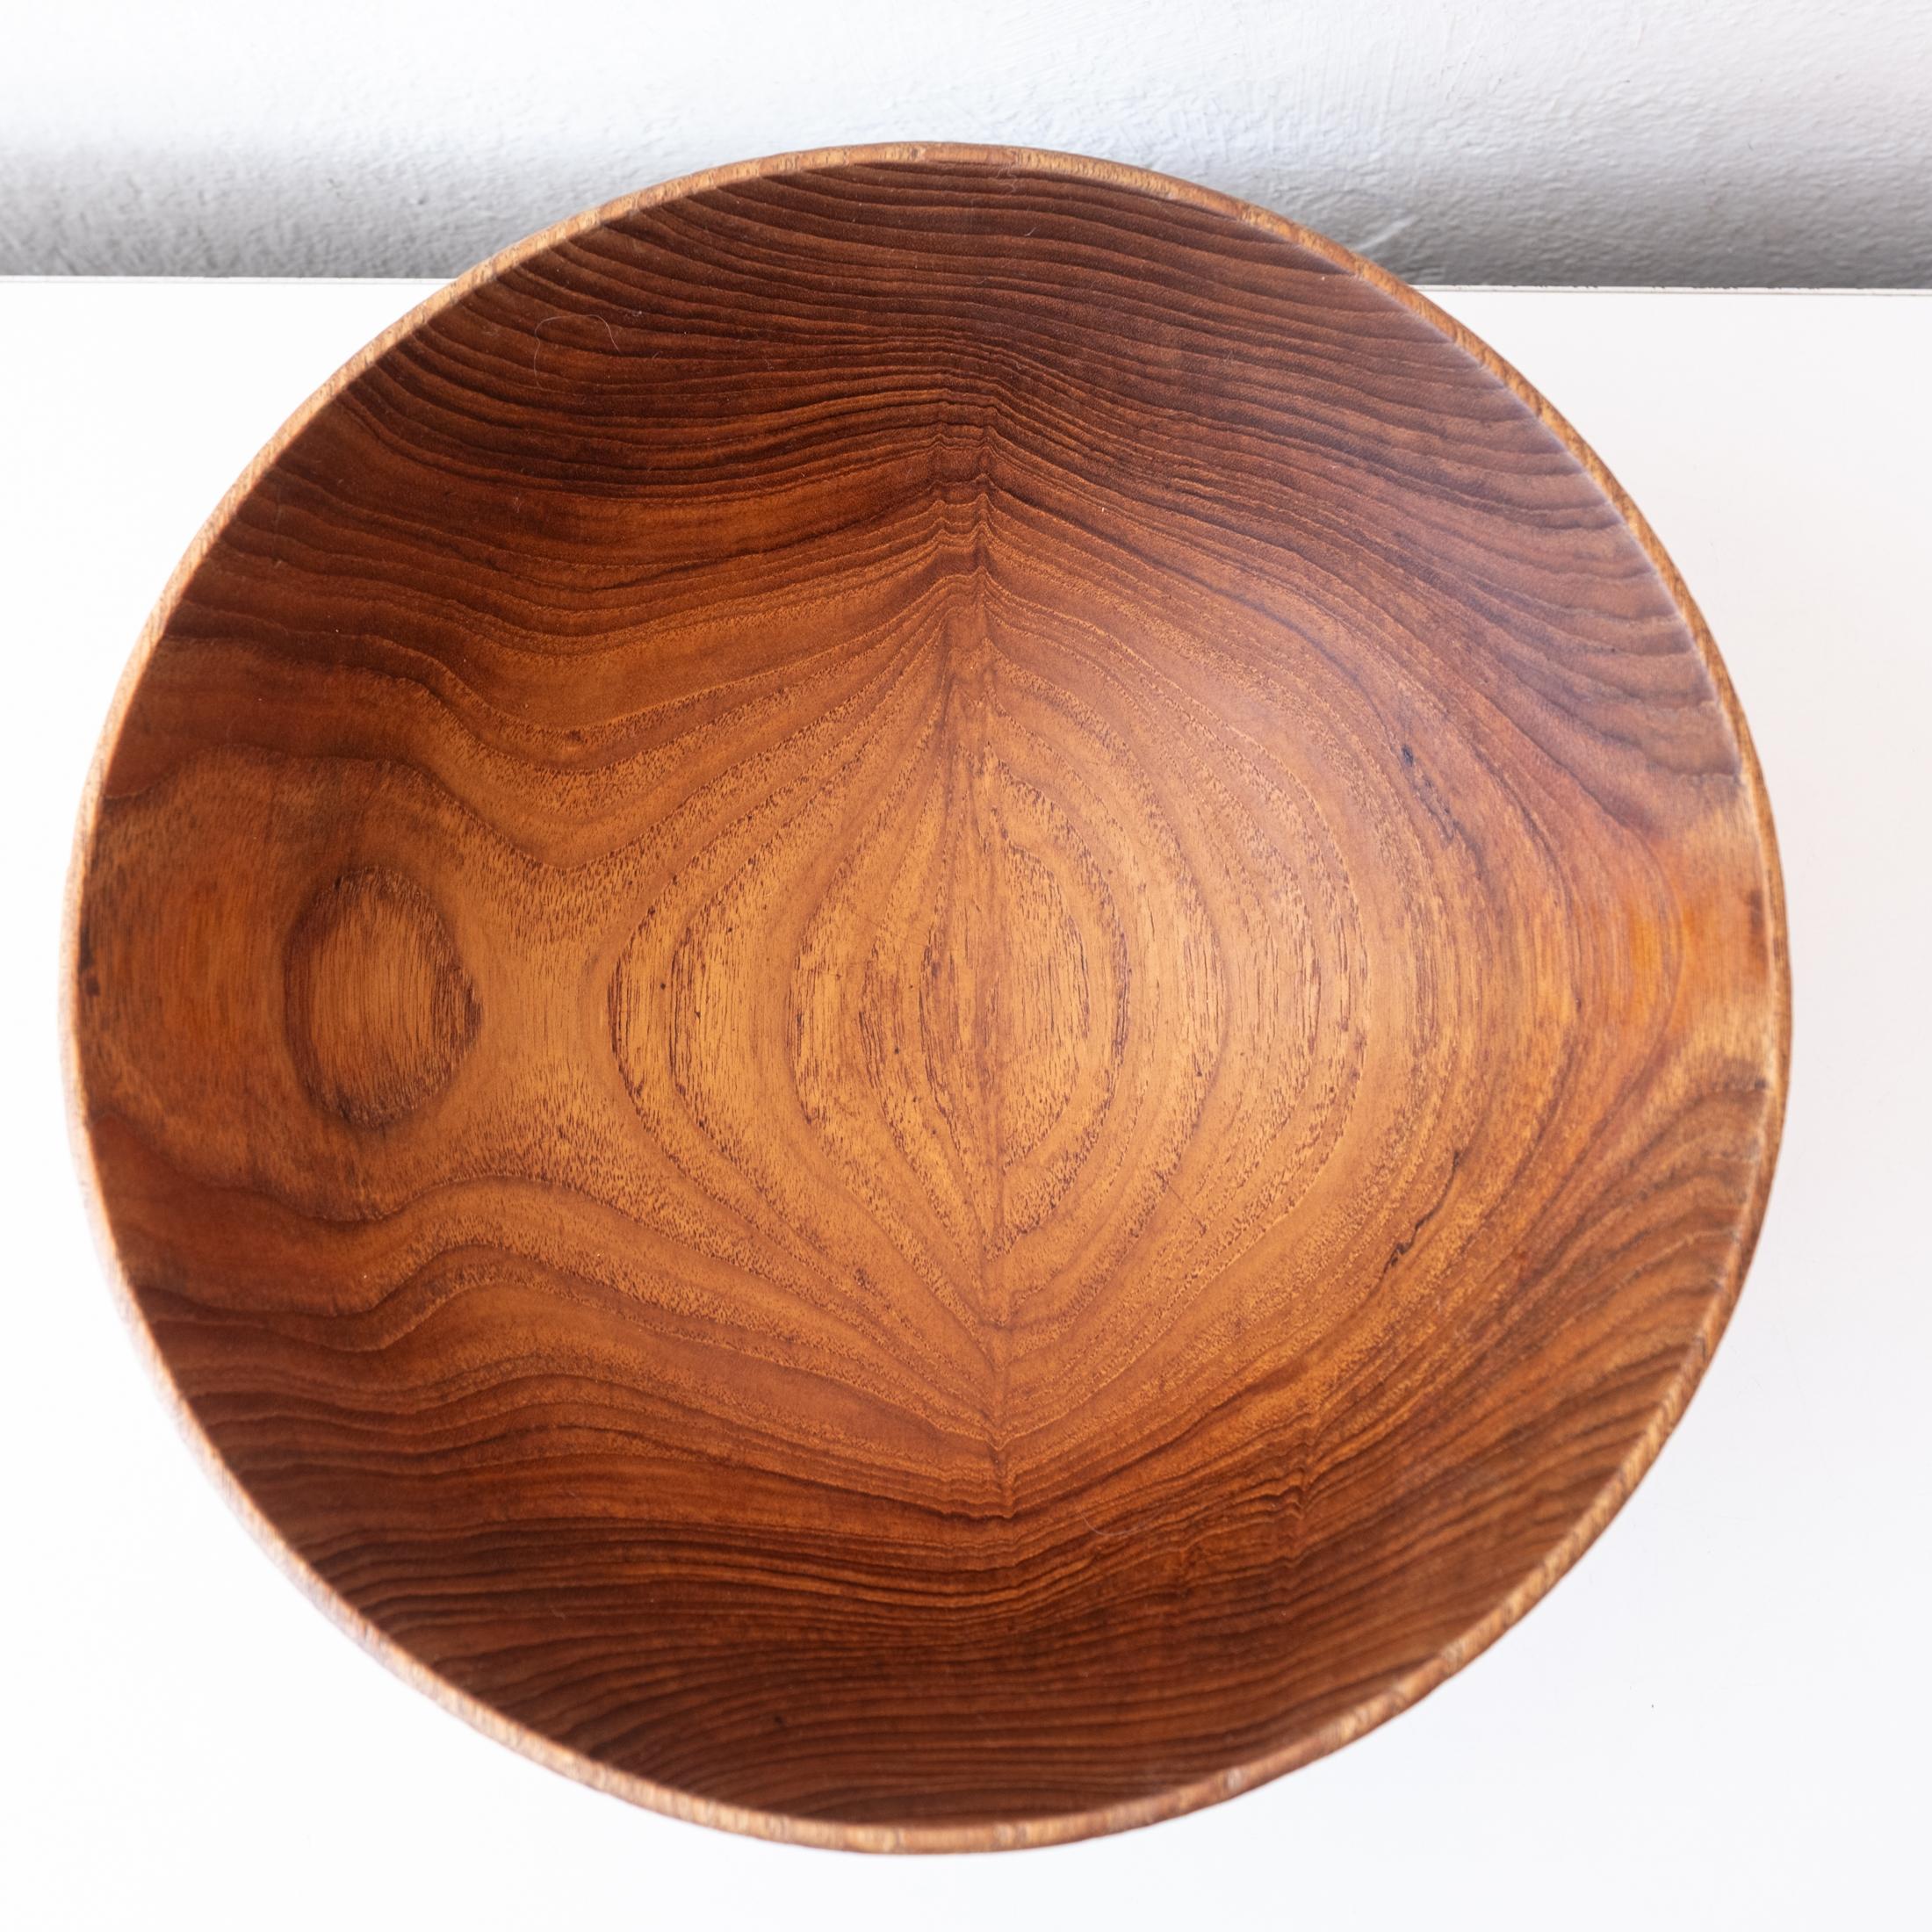 Mid-20th Century Studio Turned Teak Footed Bowl by Bob Stocksdale For Sale